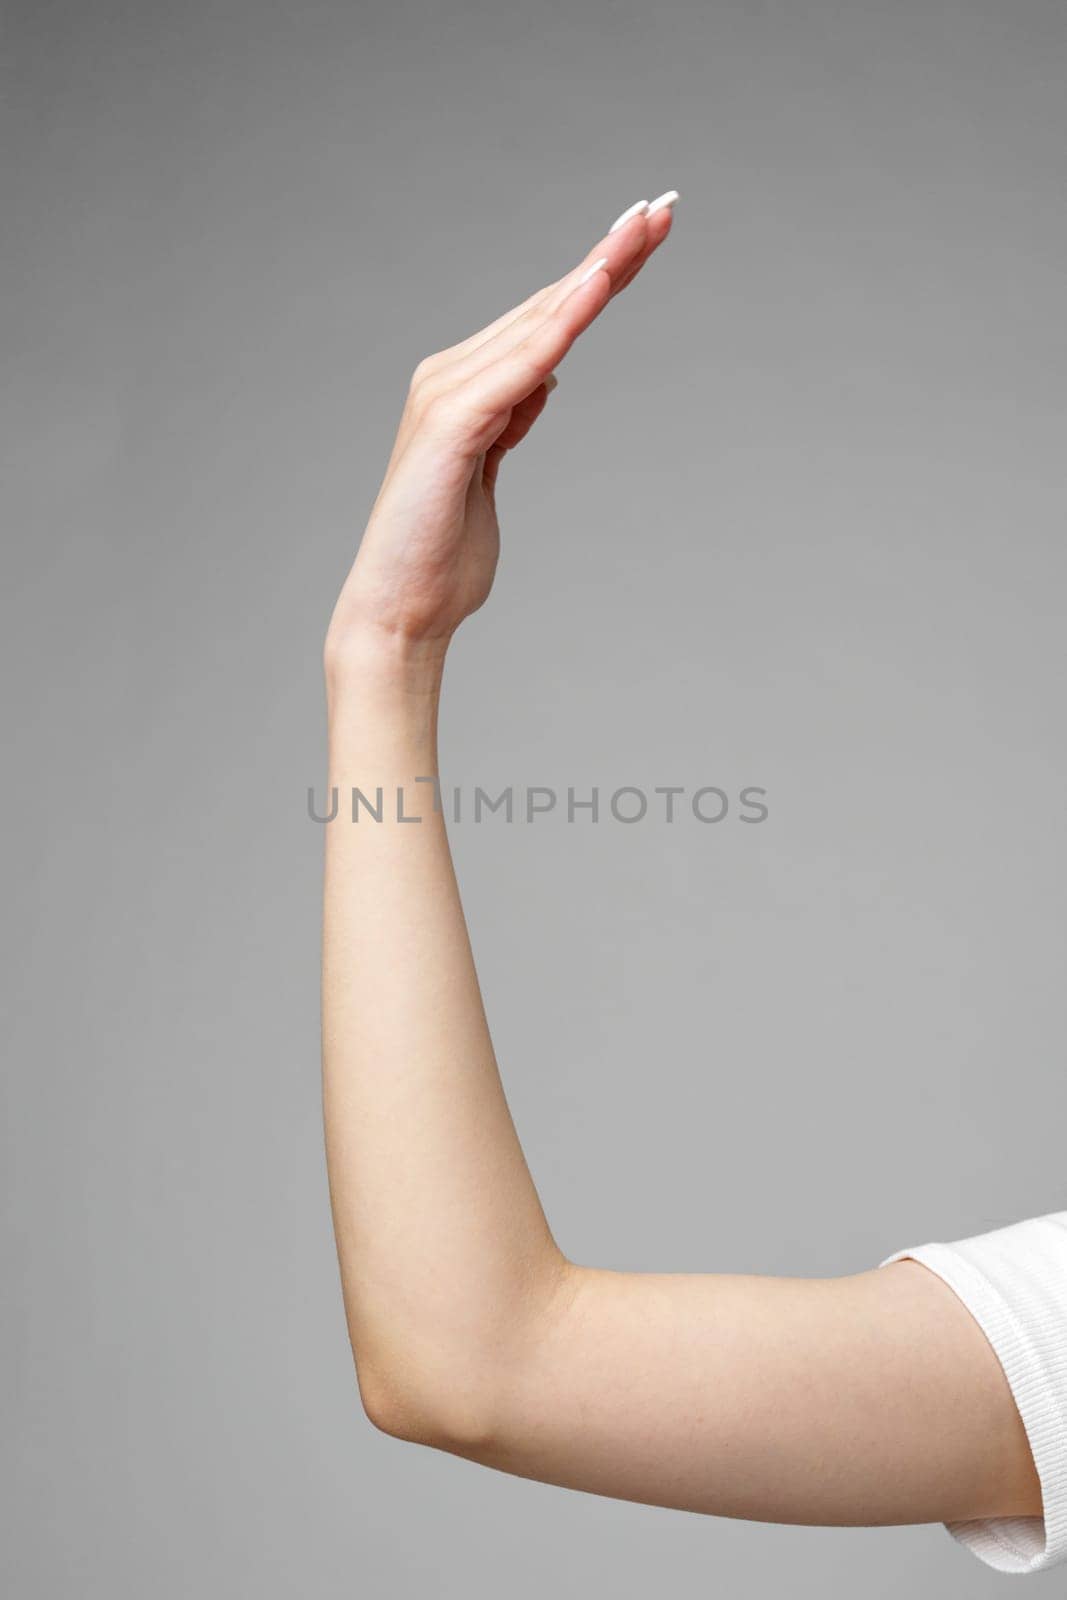 Female hand gesturing sign against gray background close up